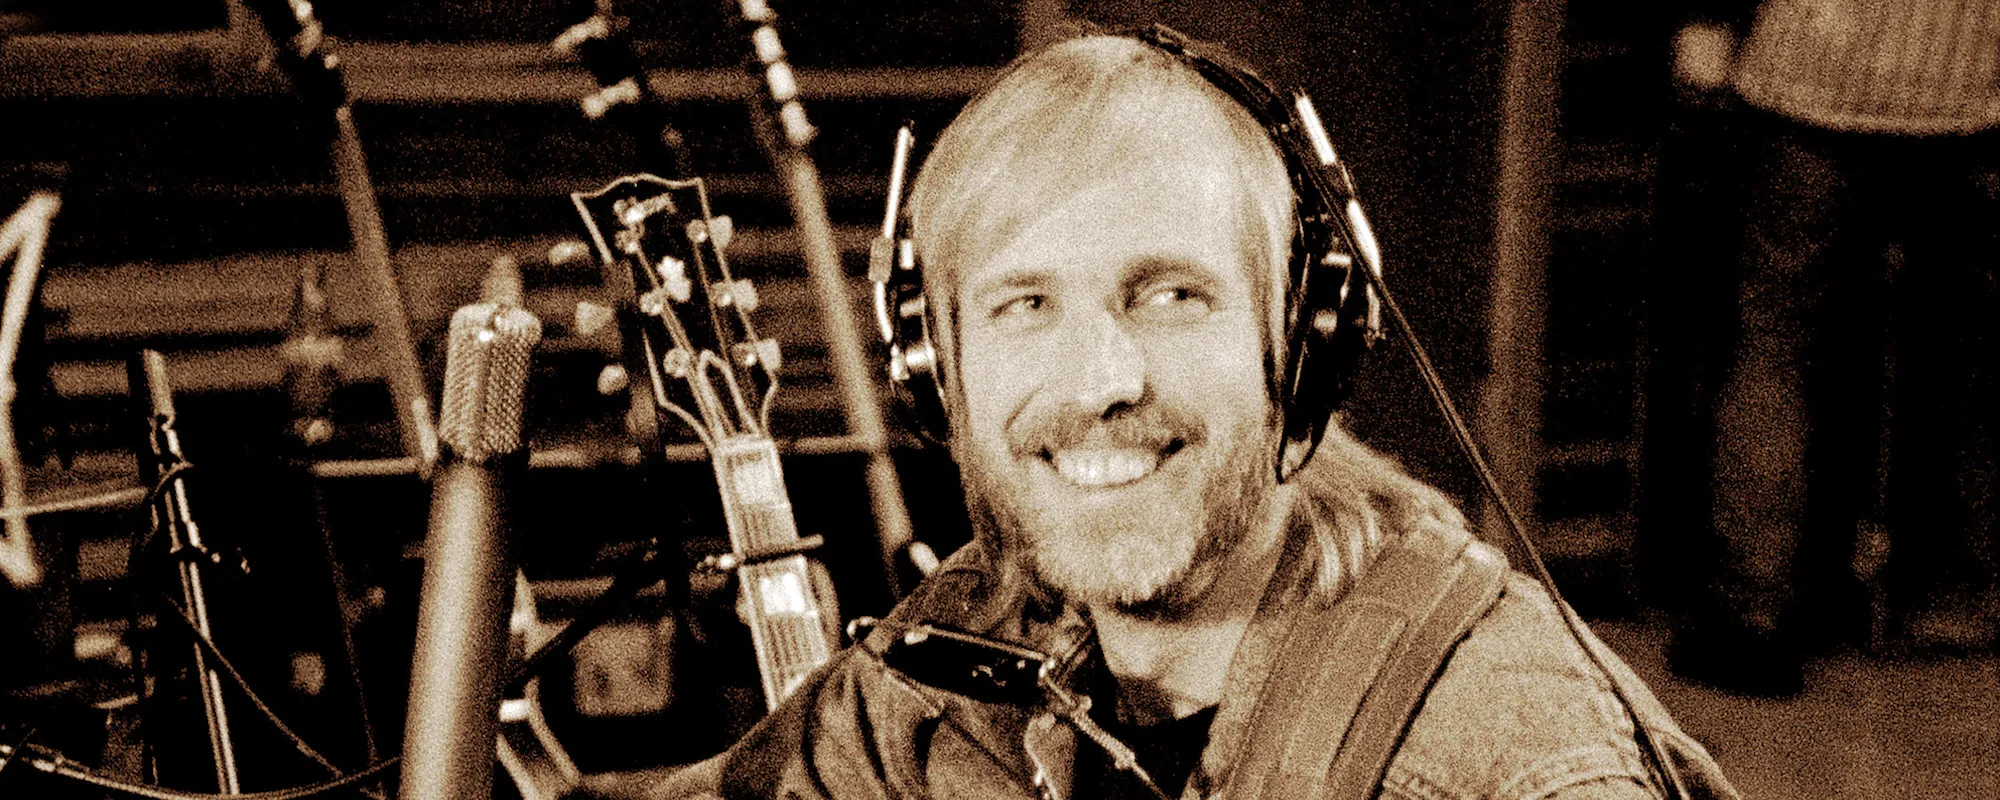 Behind the Comforting Meaning of “Wildflowers” by Tom Petty